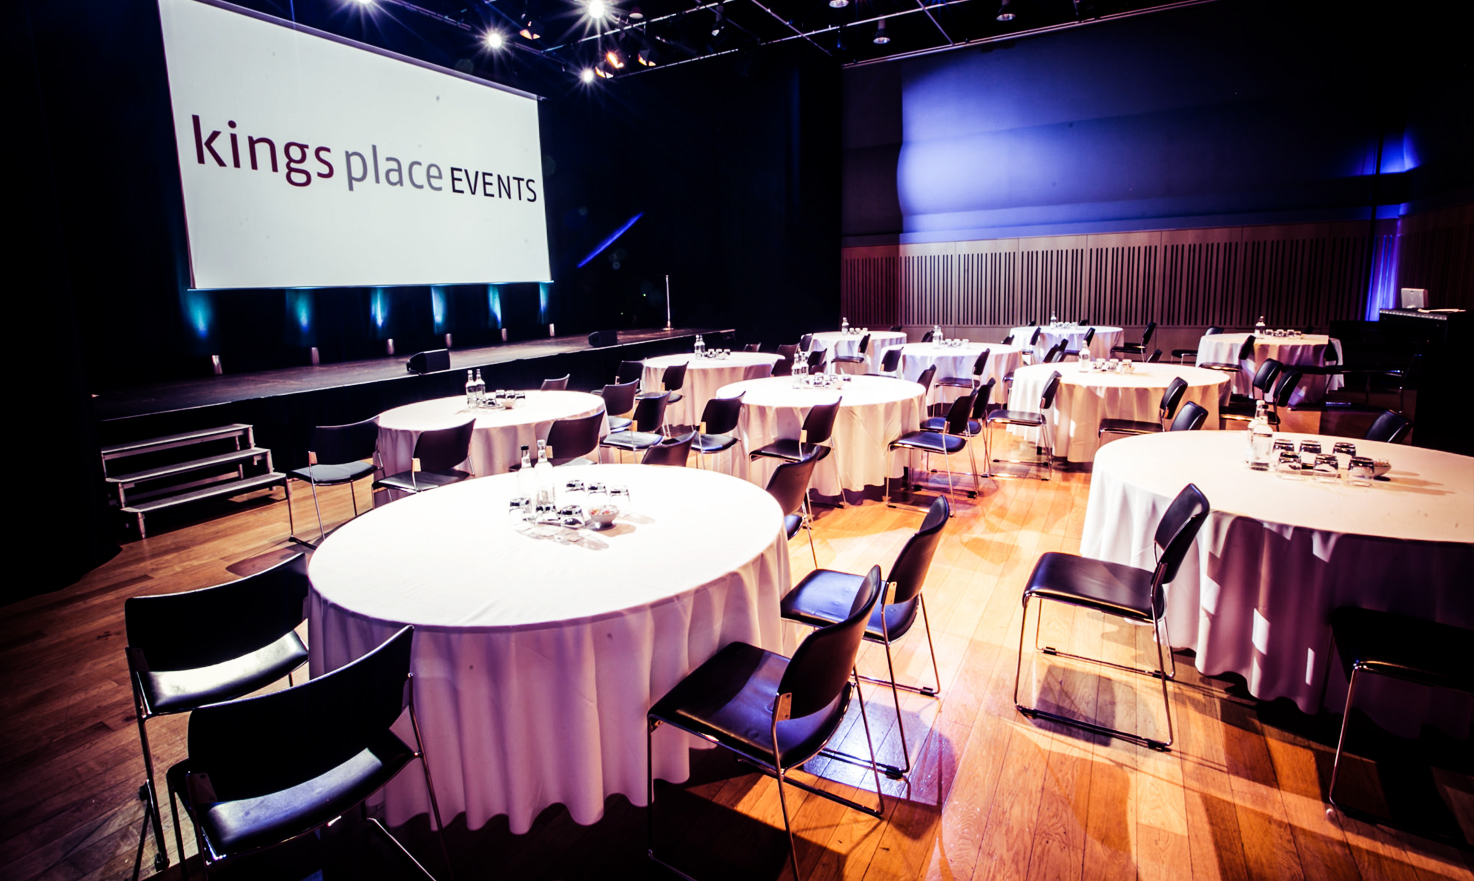 Right Angle Corporate Events Venues - Kings Place Venue